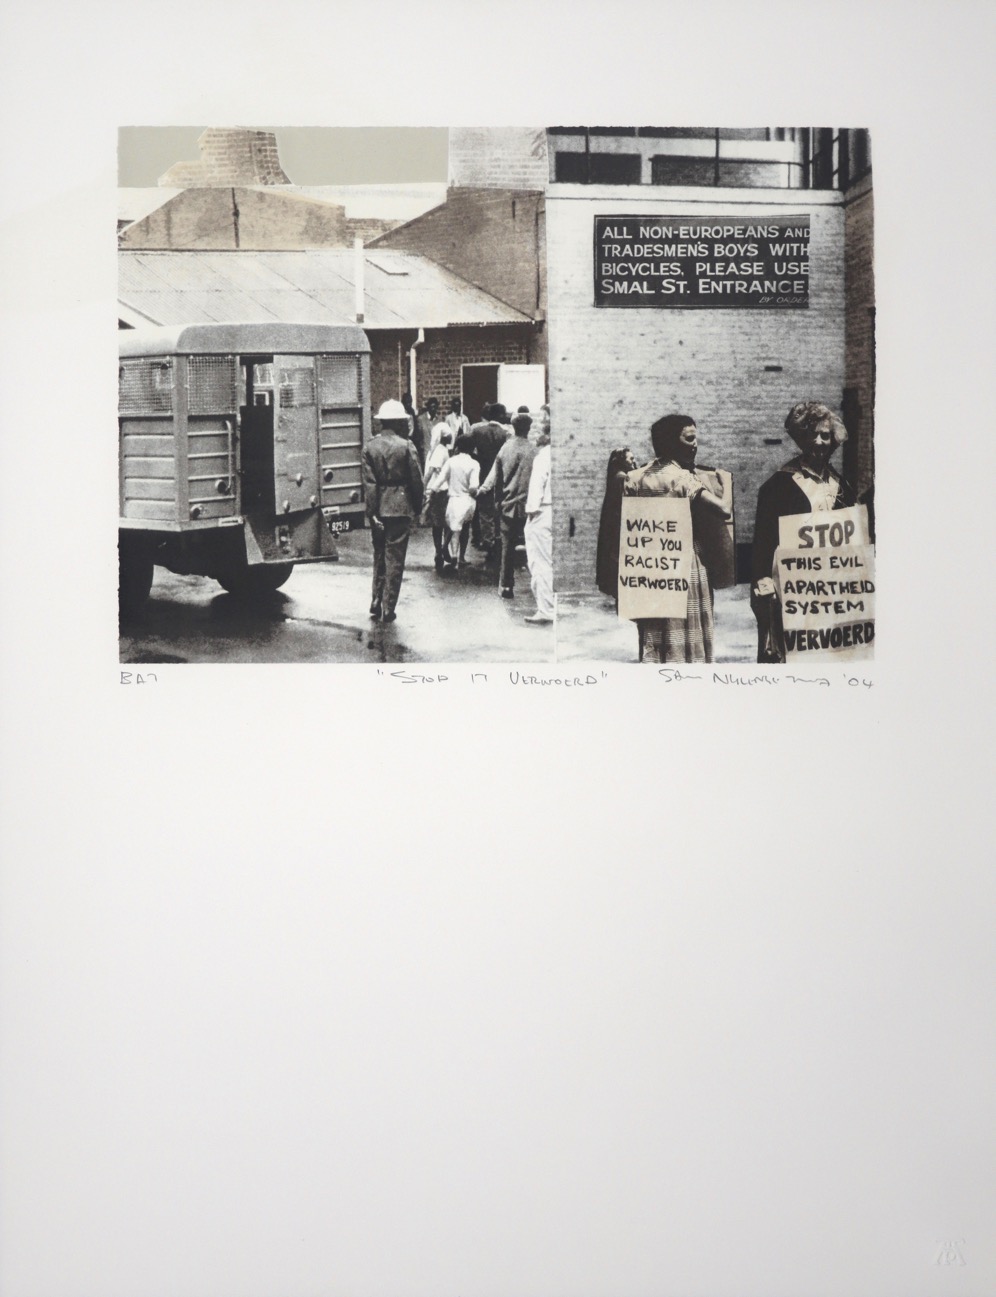 Collage photo-lithograph of police van and women holding protest placards